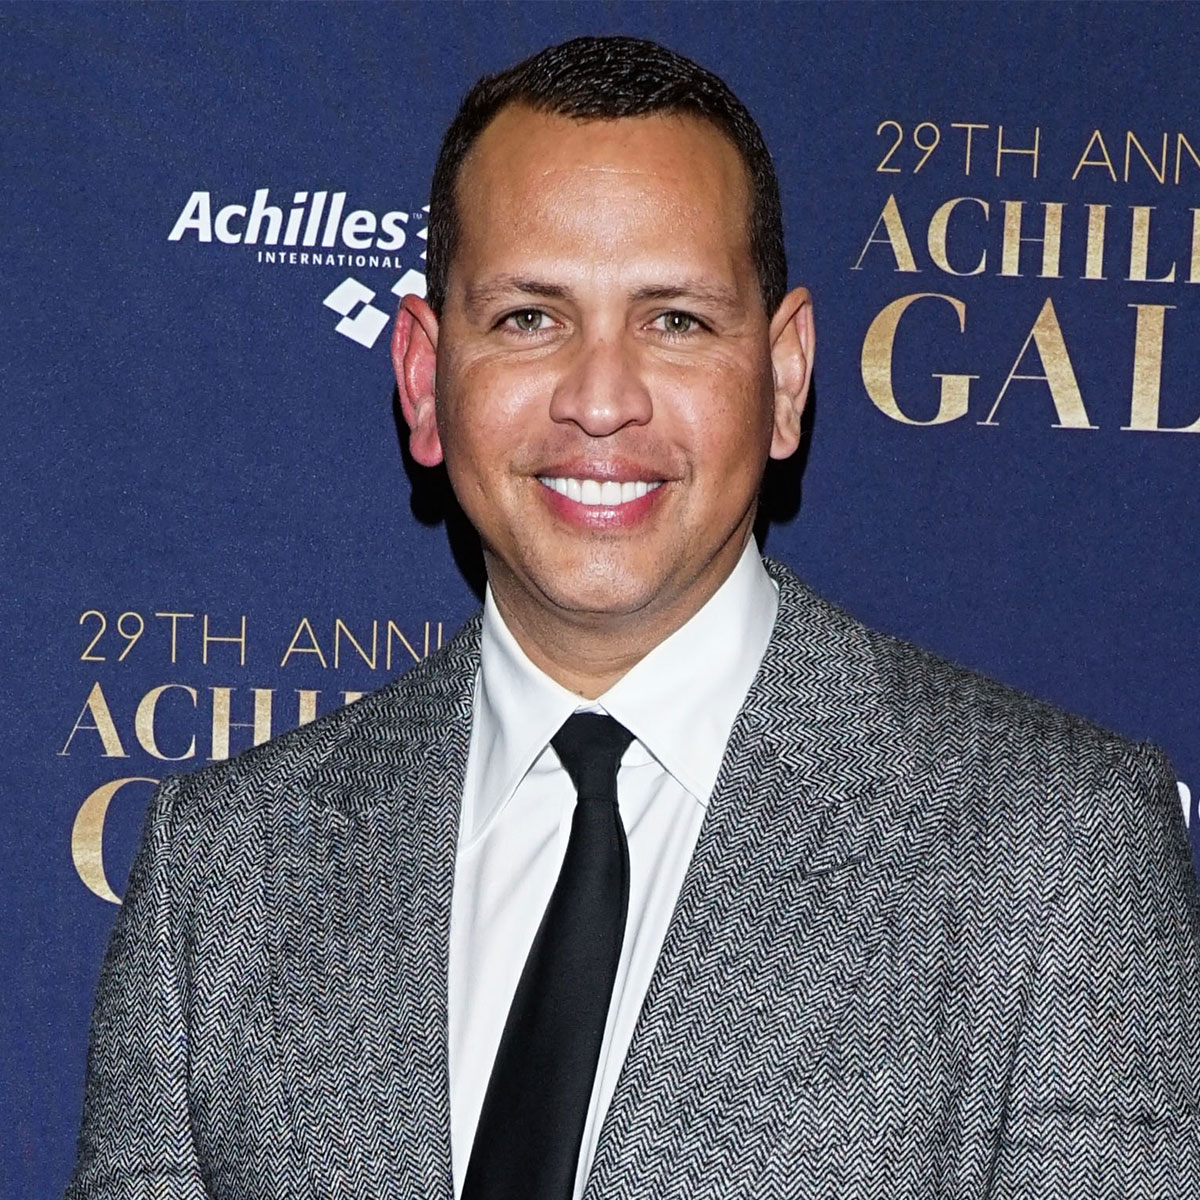 Is Alex Rodriguez Launching New Makeup?